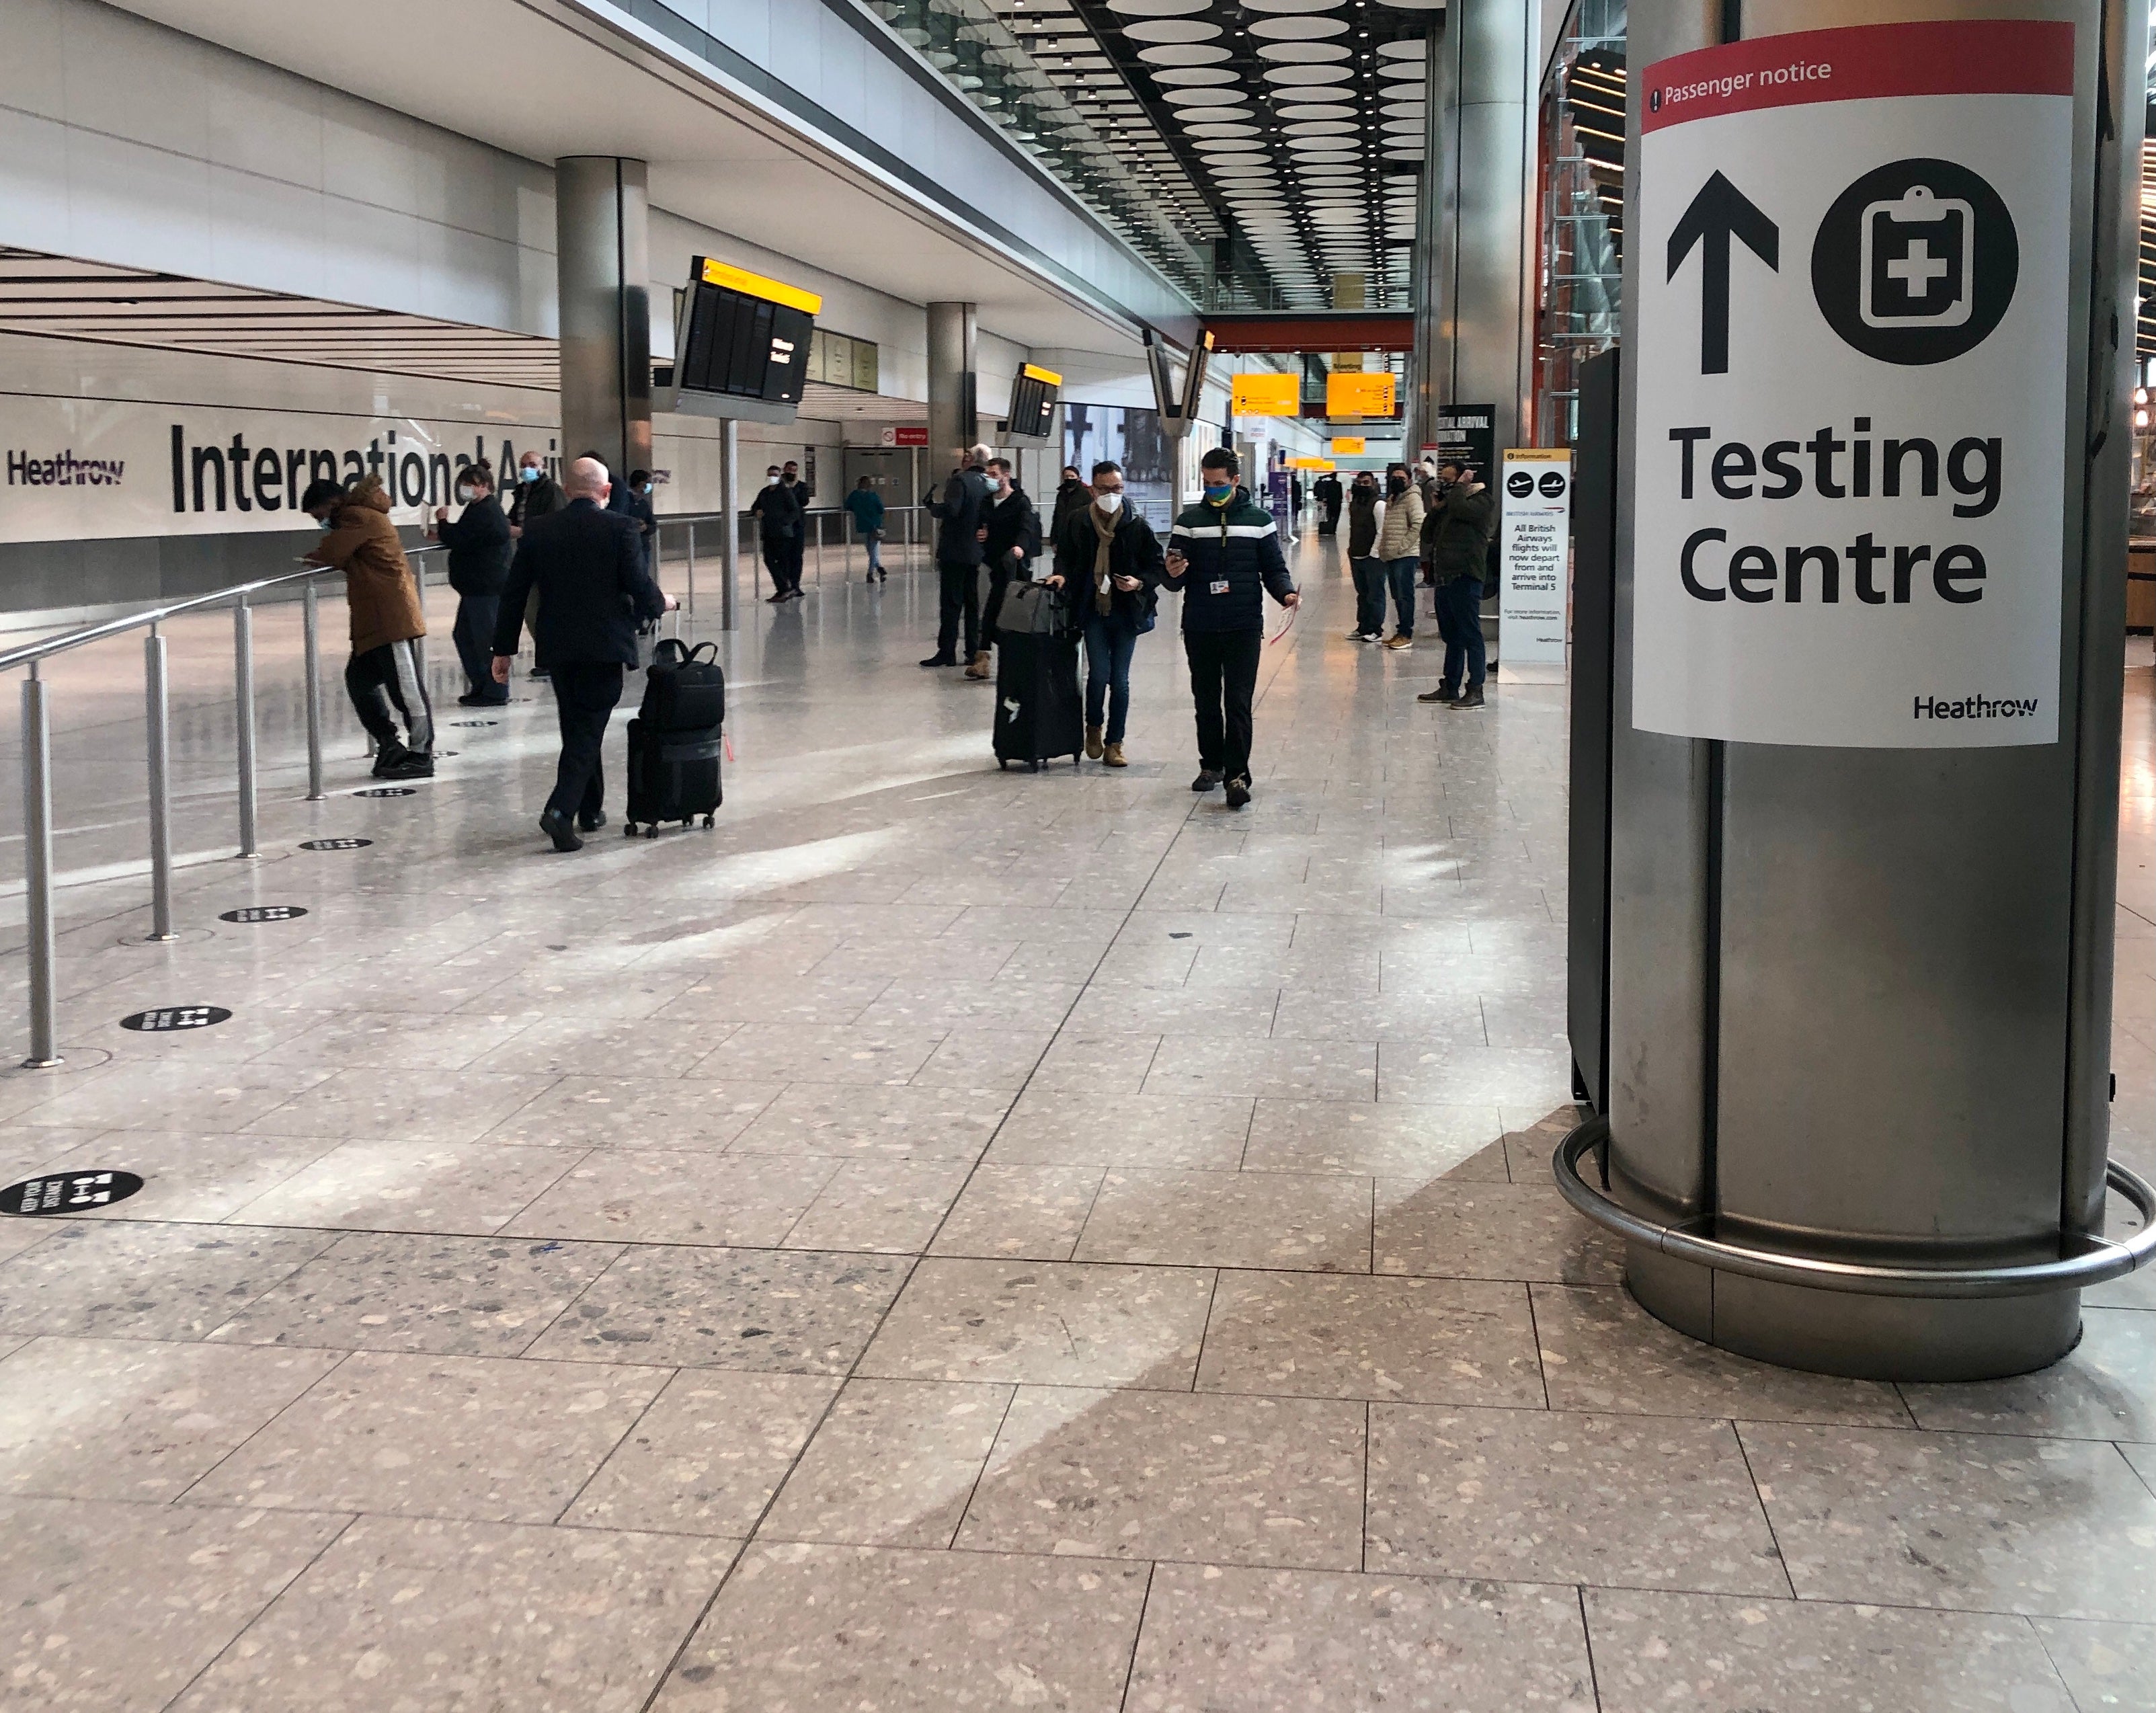 Signs indicate a testing centre at Heathrow Airport